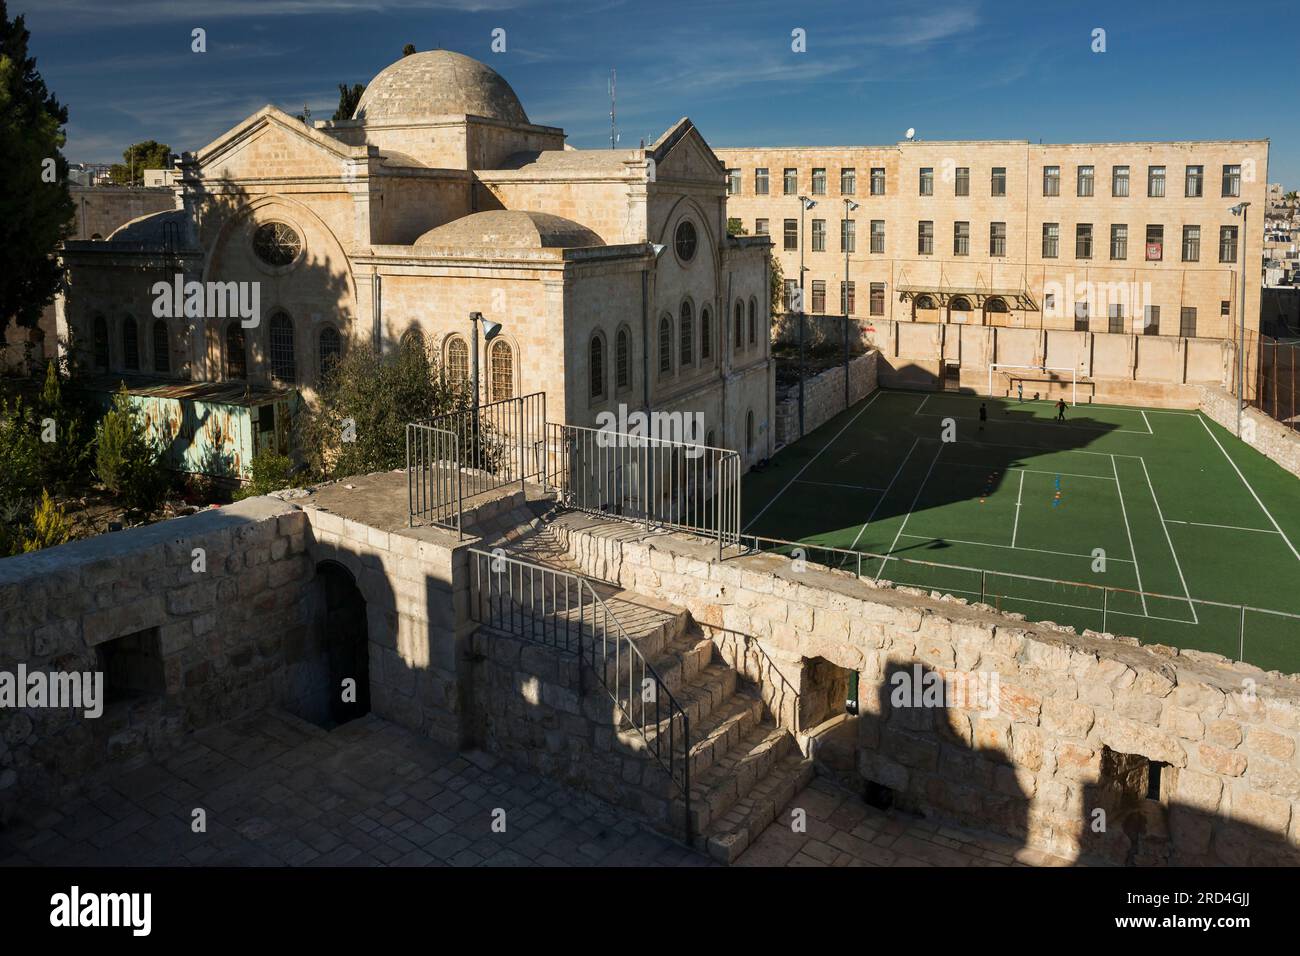 Horizontal high angle view of a school in the Armenian Quarter of the Old City, Jerusalem, Israel Stock Photo